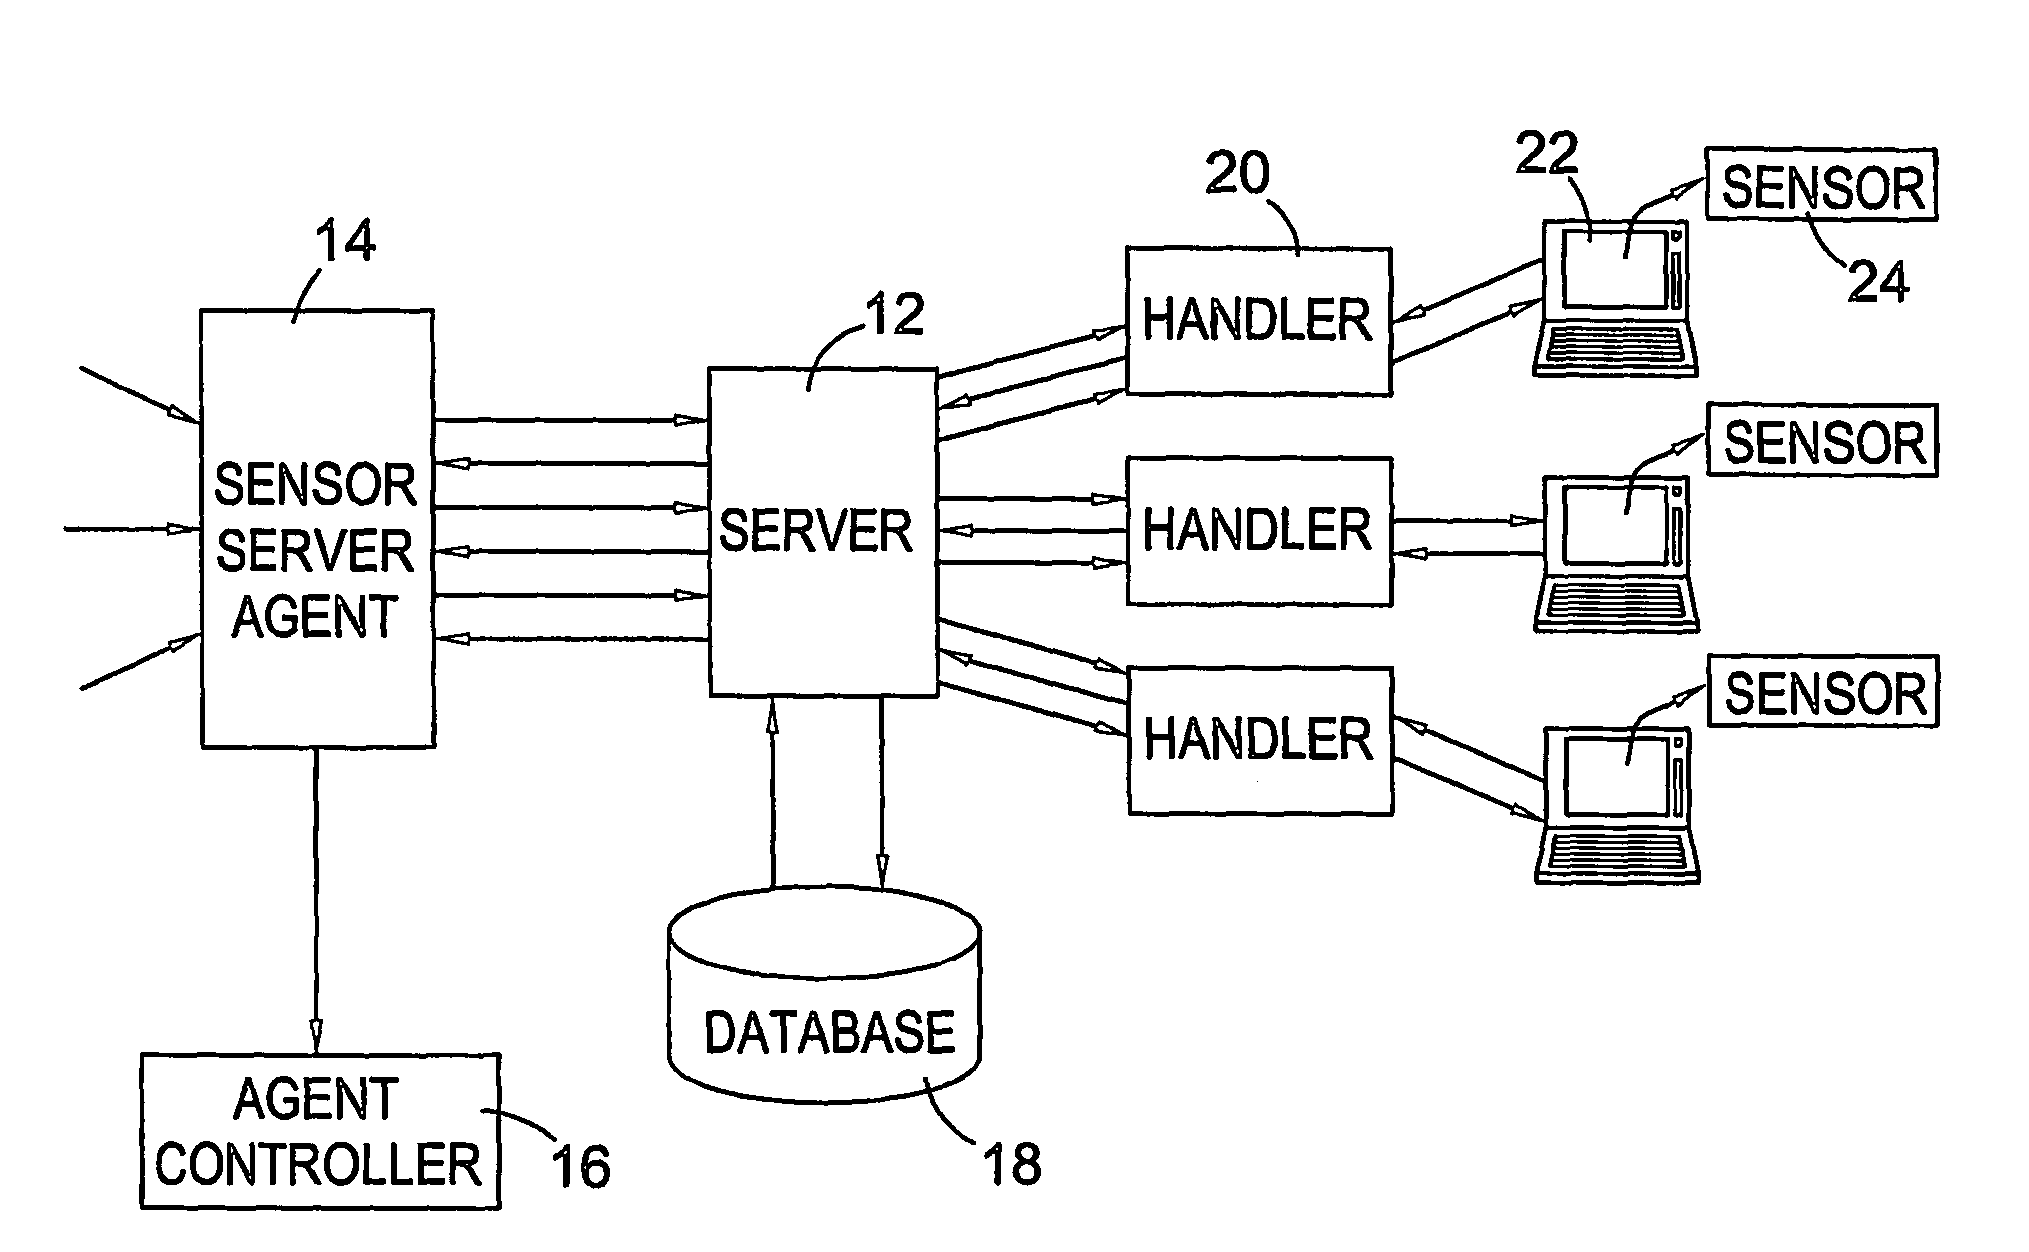 Remote monitoring by tracking, storing, and analyzing user interactions with an operating system of a data processing device